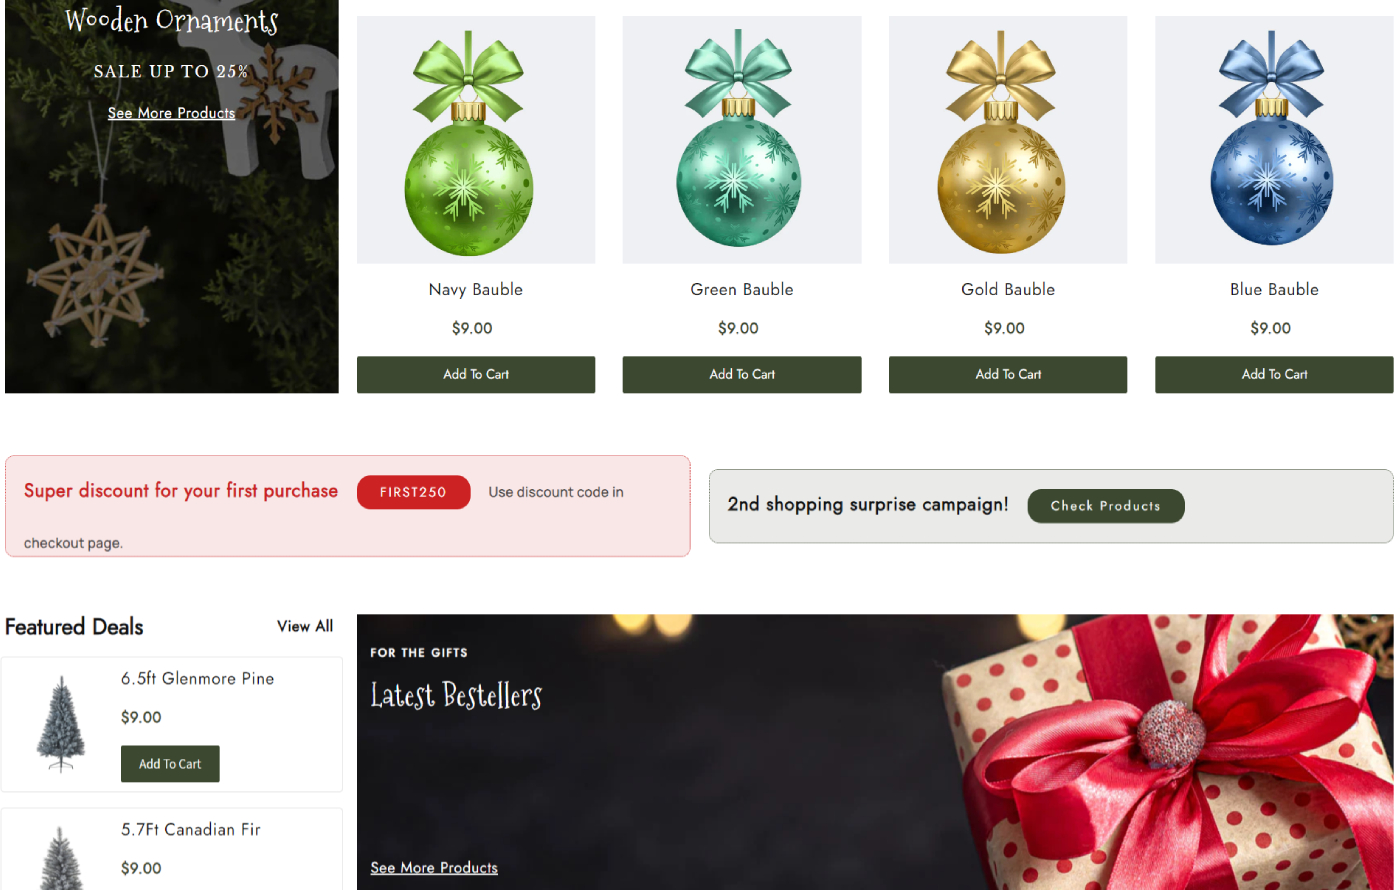 Noelify - Christmas Shopify template built by Pagefly